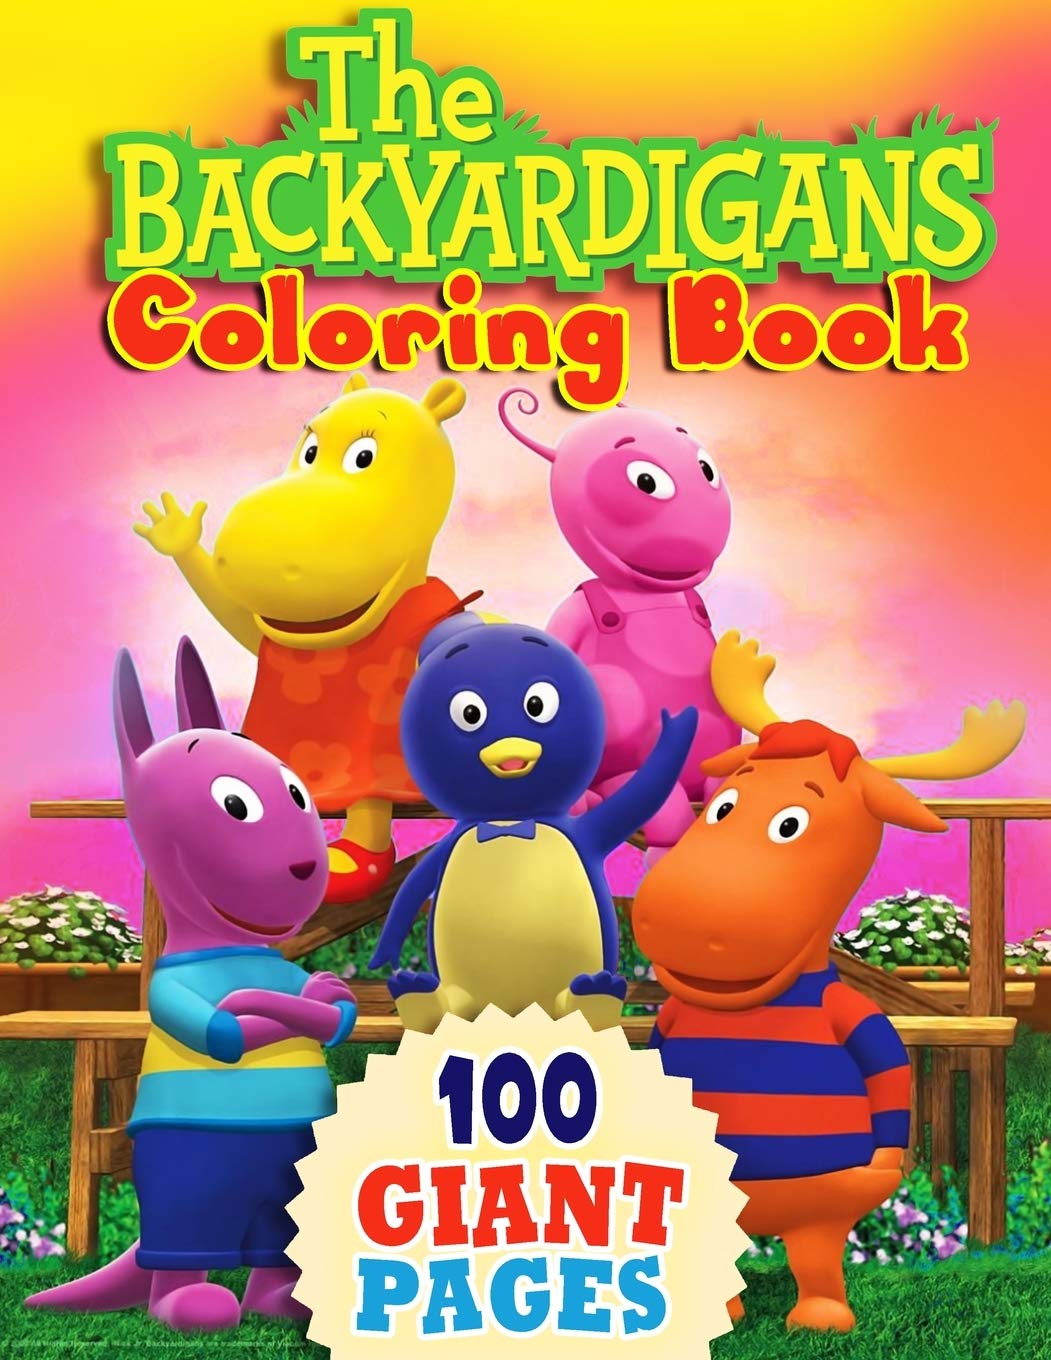 The backyardigans coloring book super gift for kids and fans